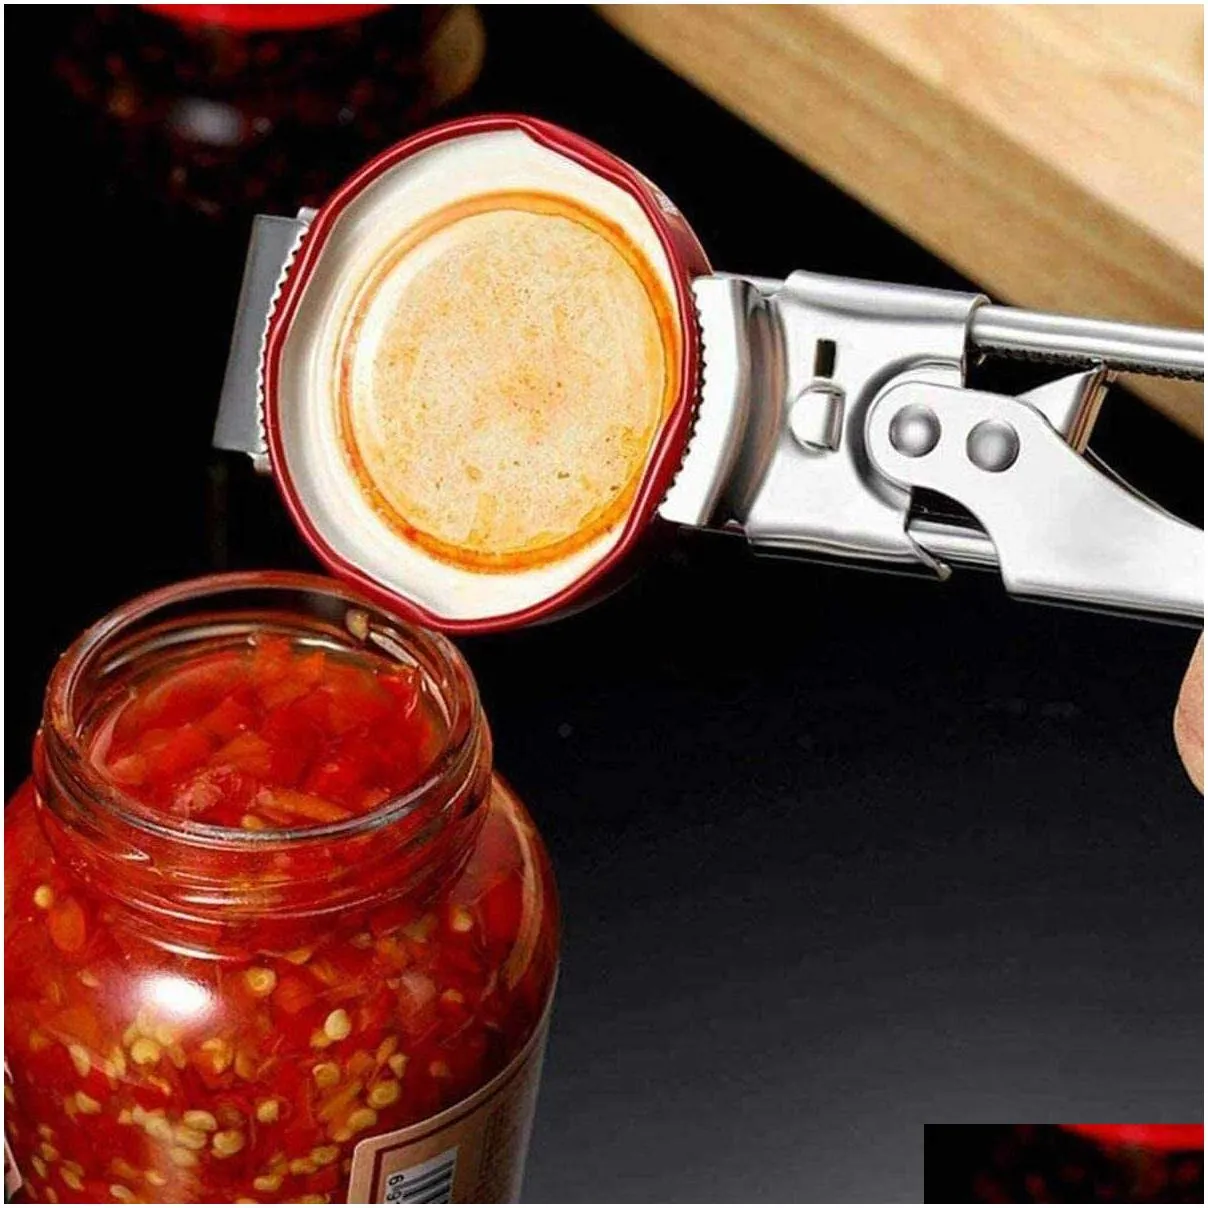 Openers New Can Openers Adjustable Stainless Steel Non-Slip Mtifunction Manual Jar Bottle Lid Opener Gadget Home Gadgets Accessories D Dhp7S